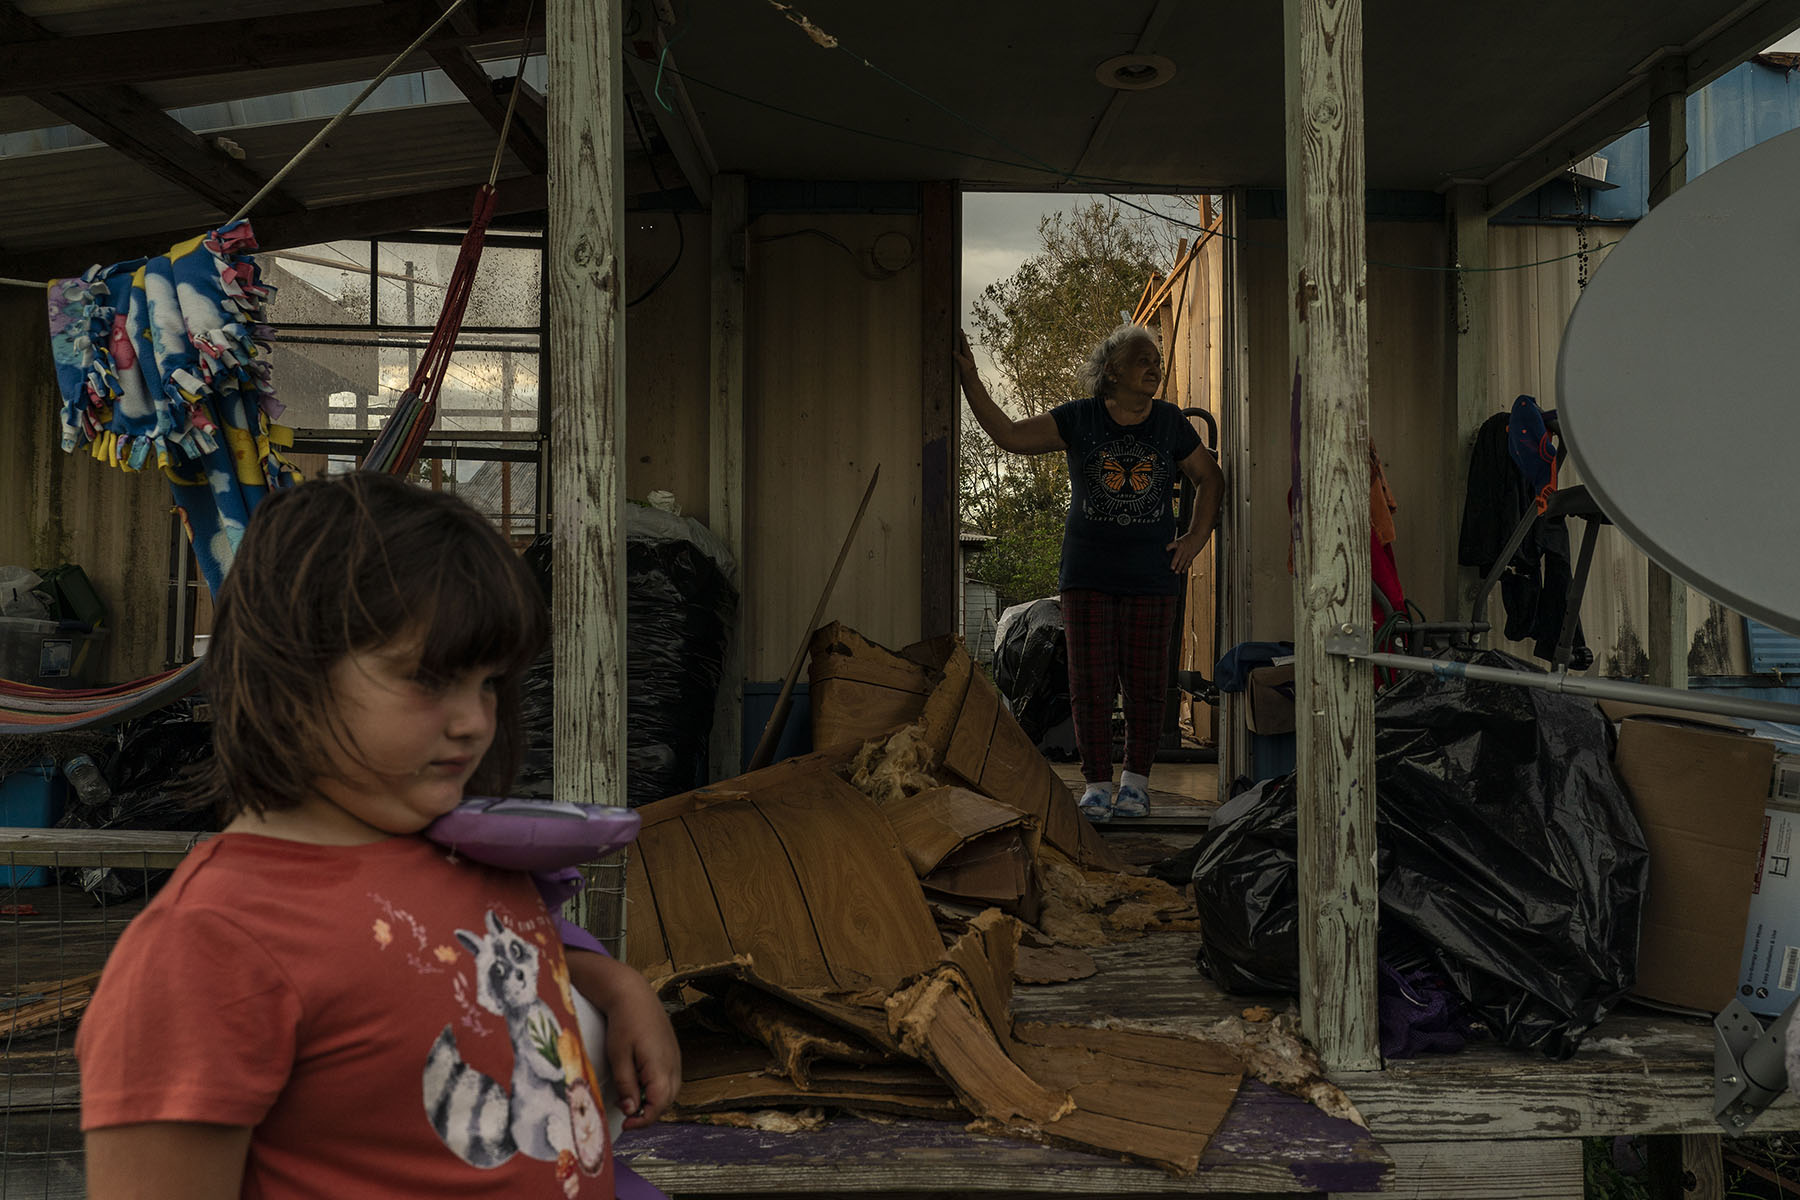 A family stands in the ruins of their home after the Hurricane Ida passed through Houma, Louisiana.